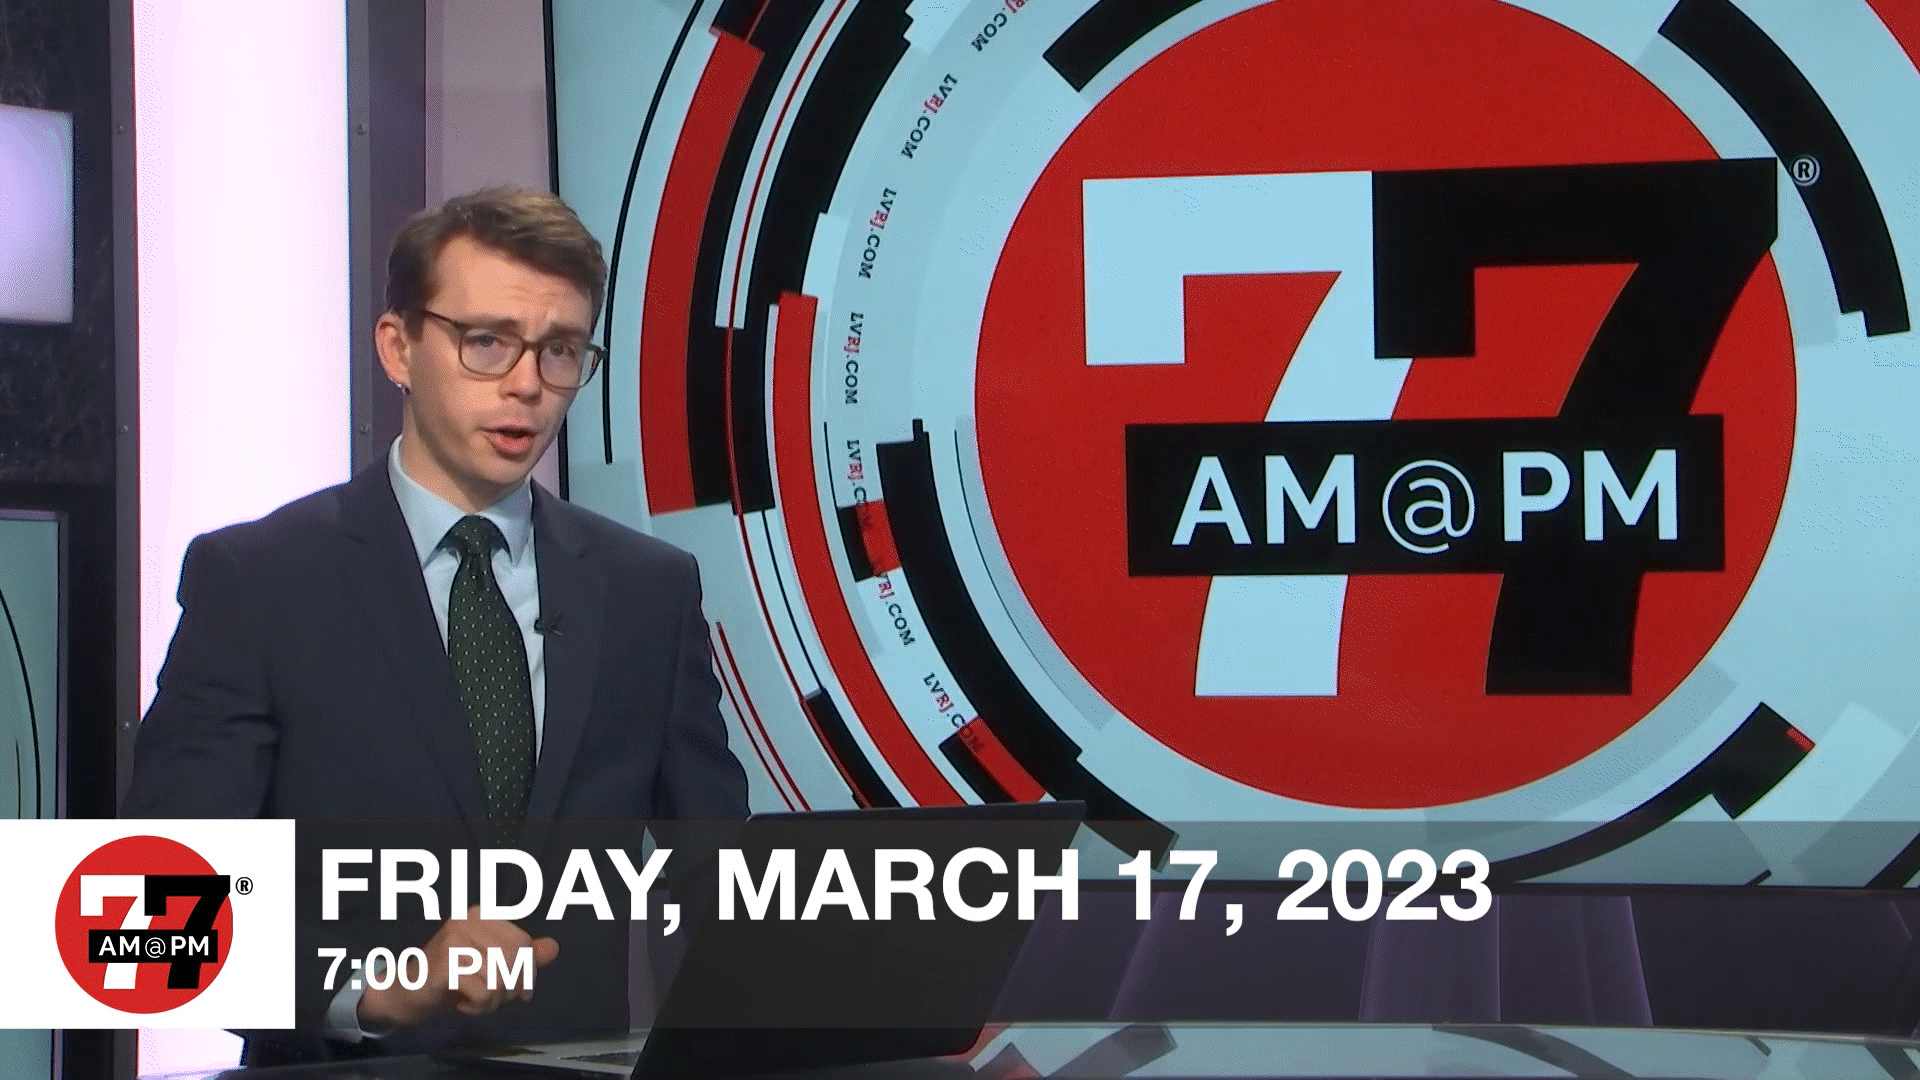 7@7PM for Friday, March 17, 2023